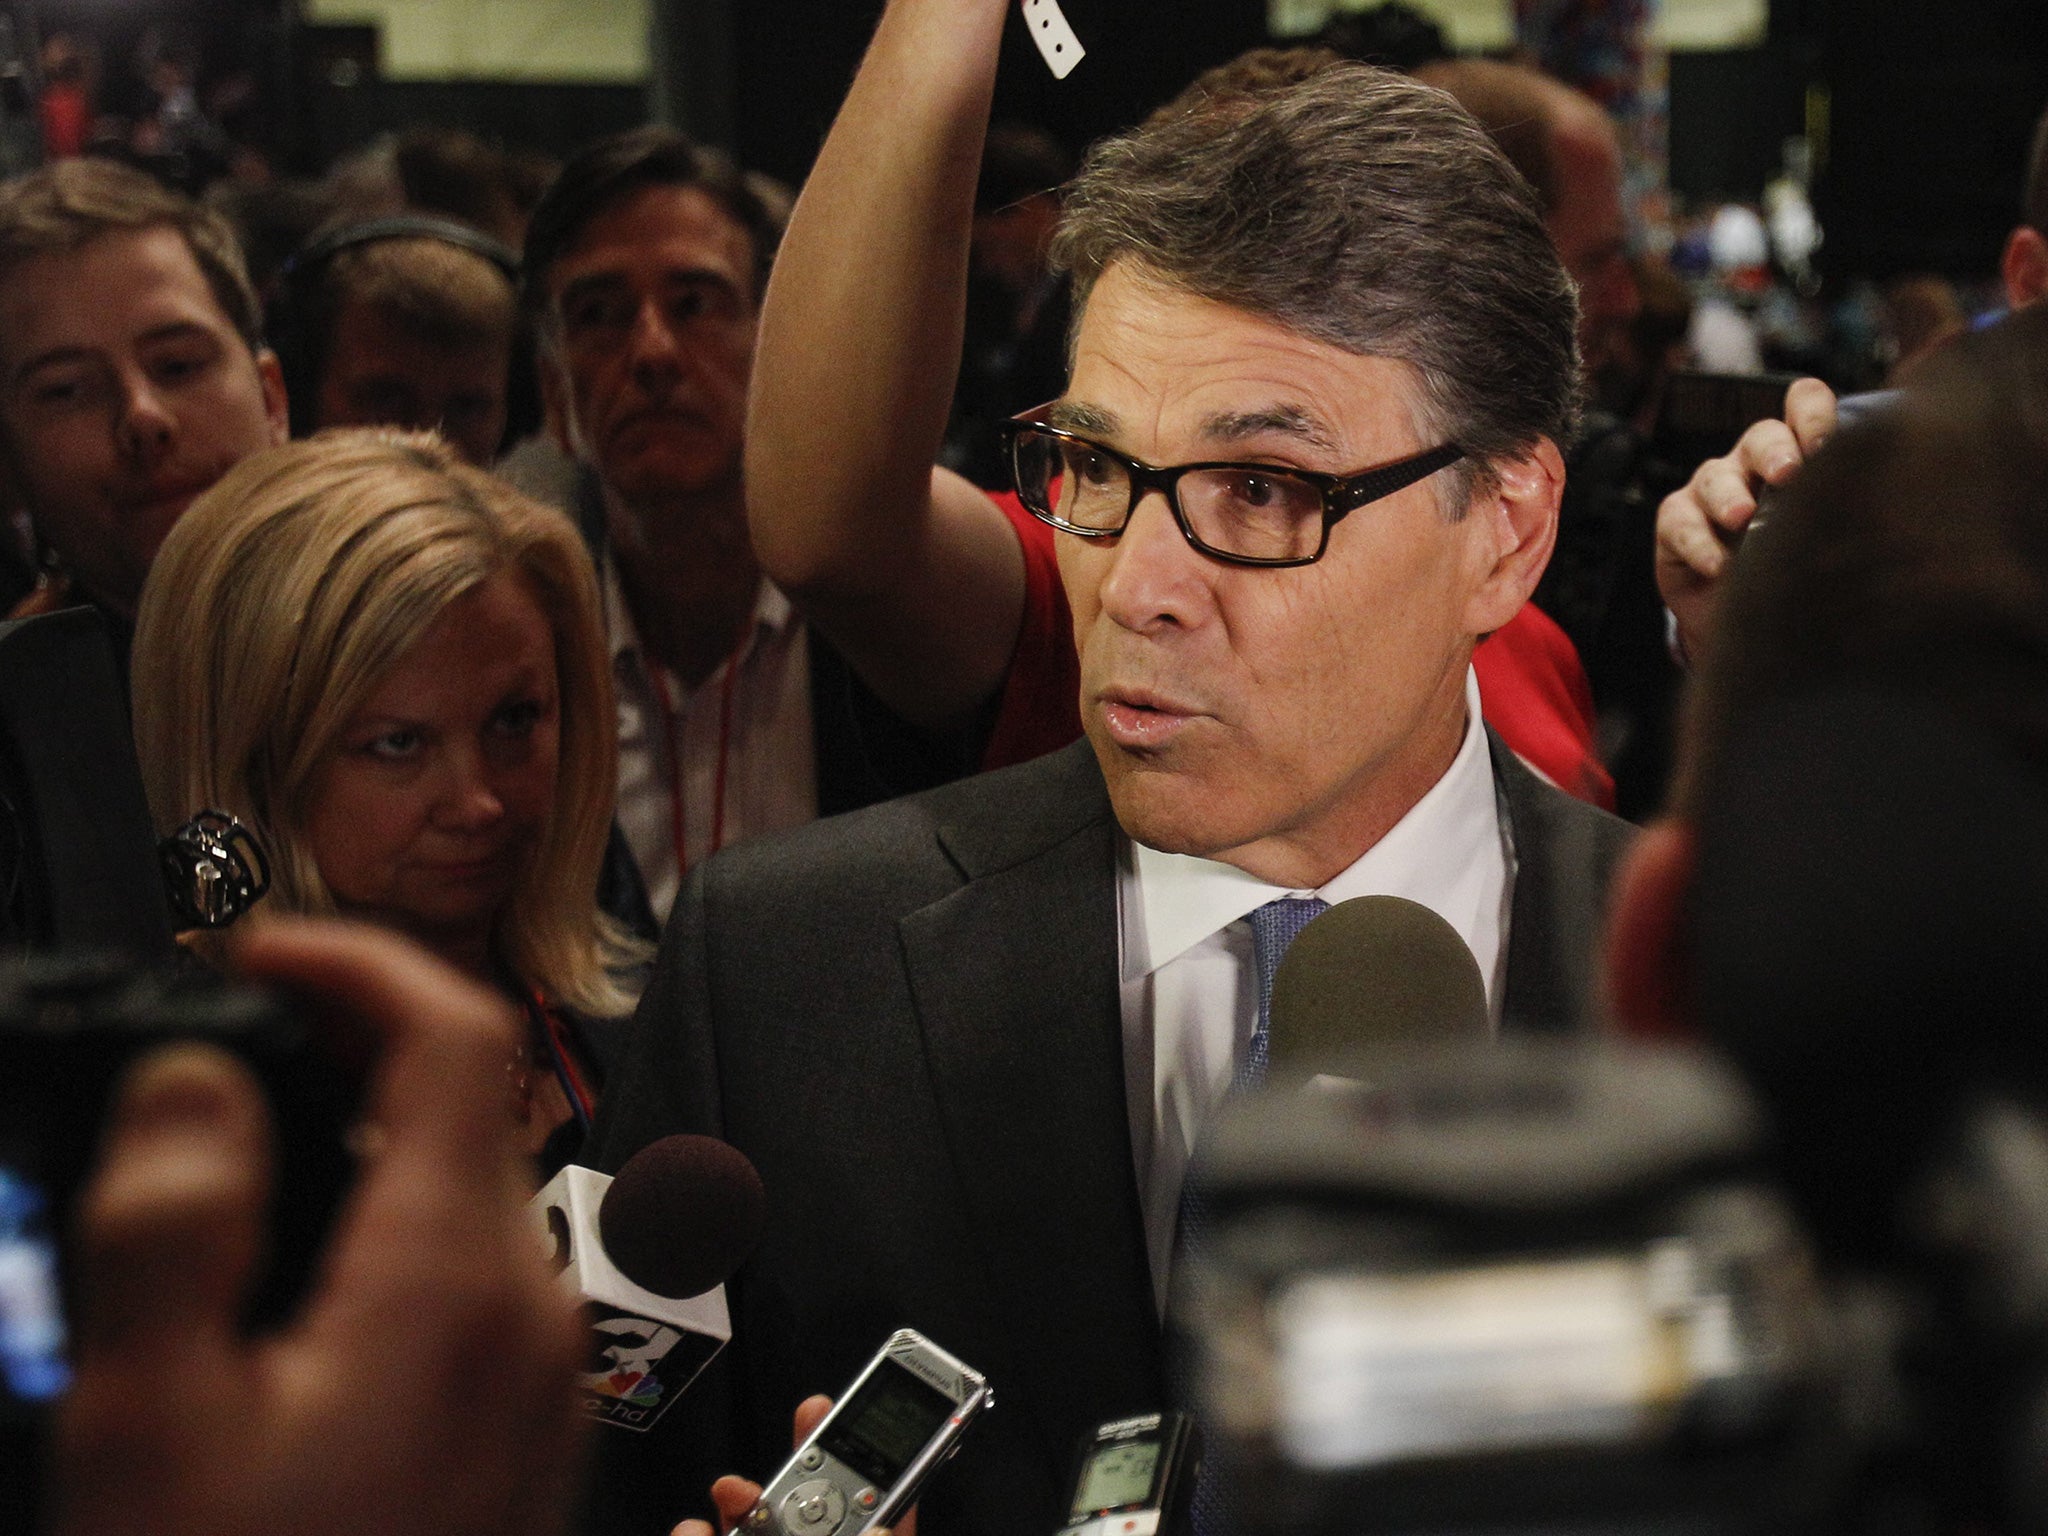 Rick Perry is questioned by journalists (EPA)